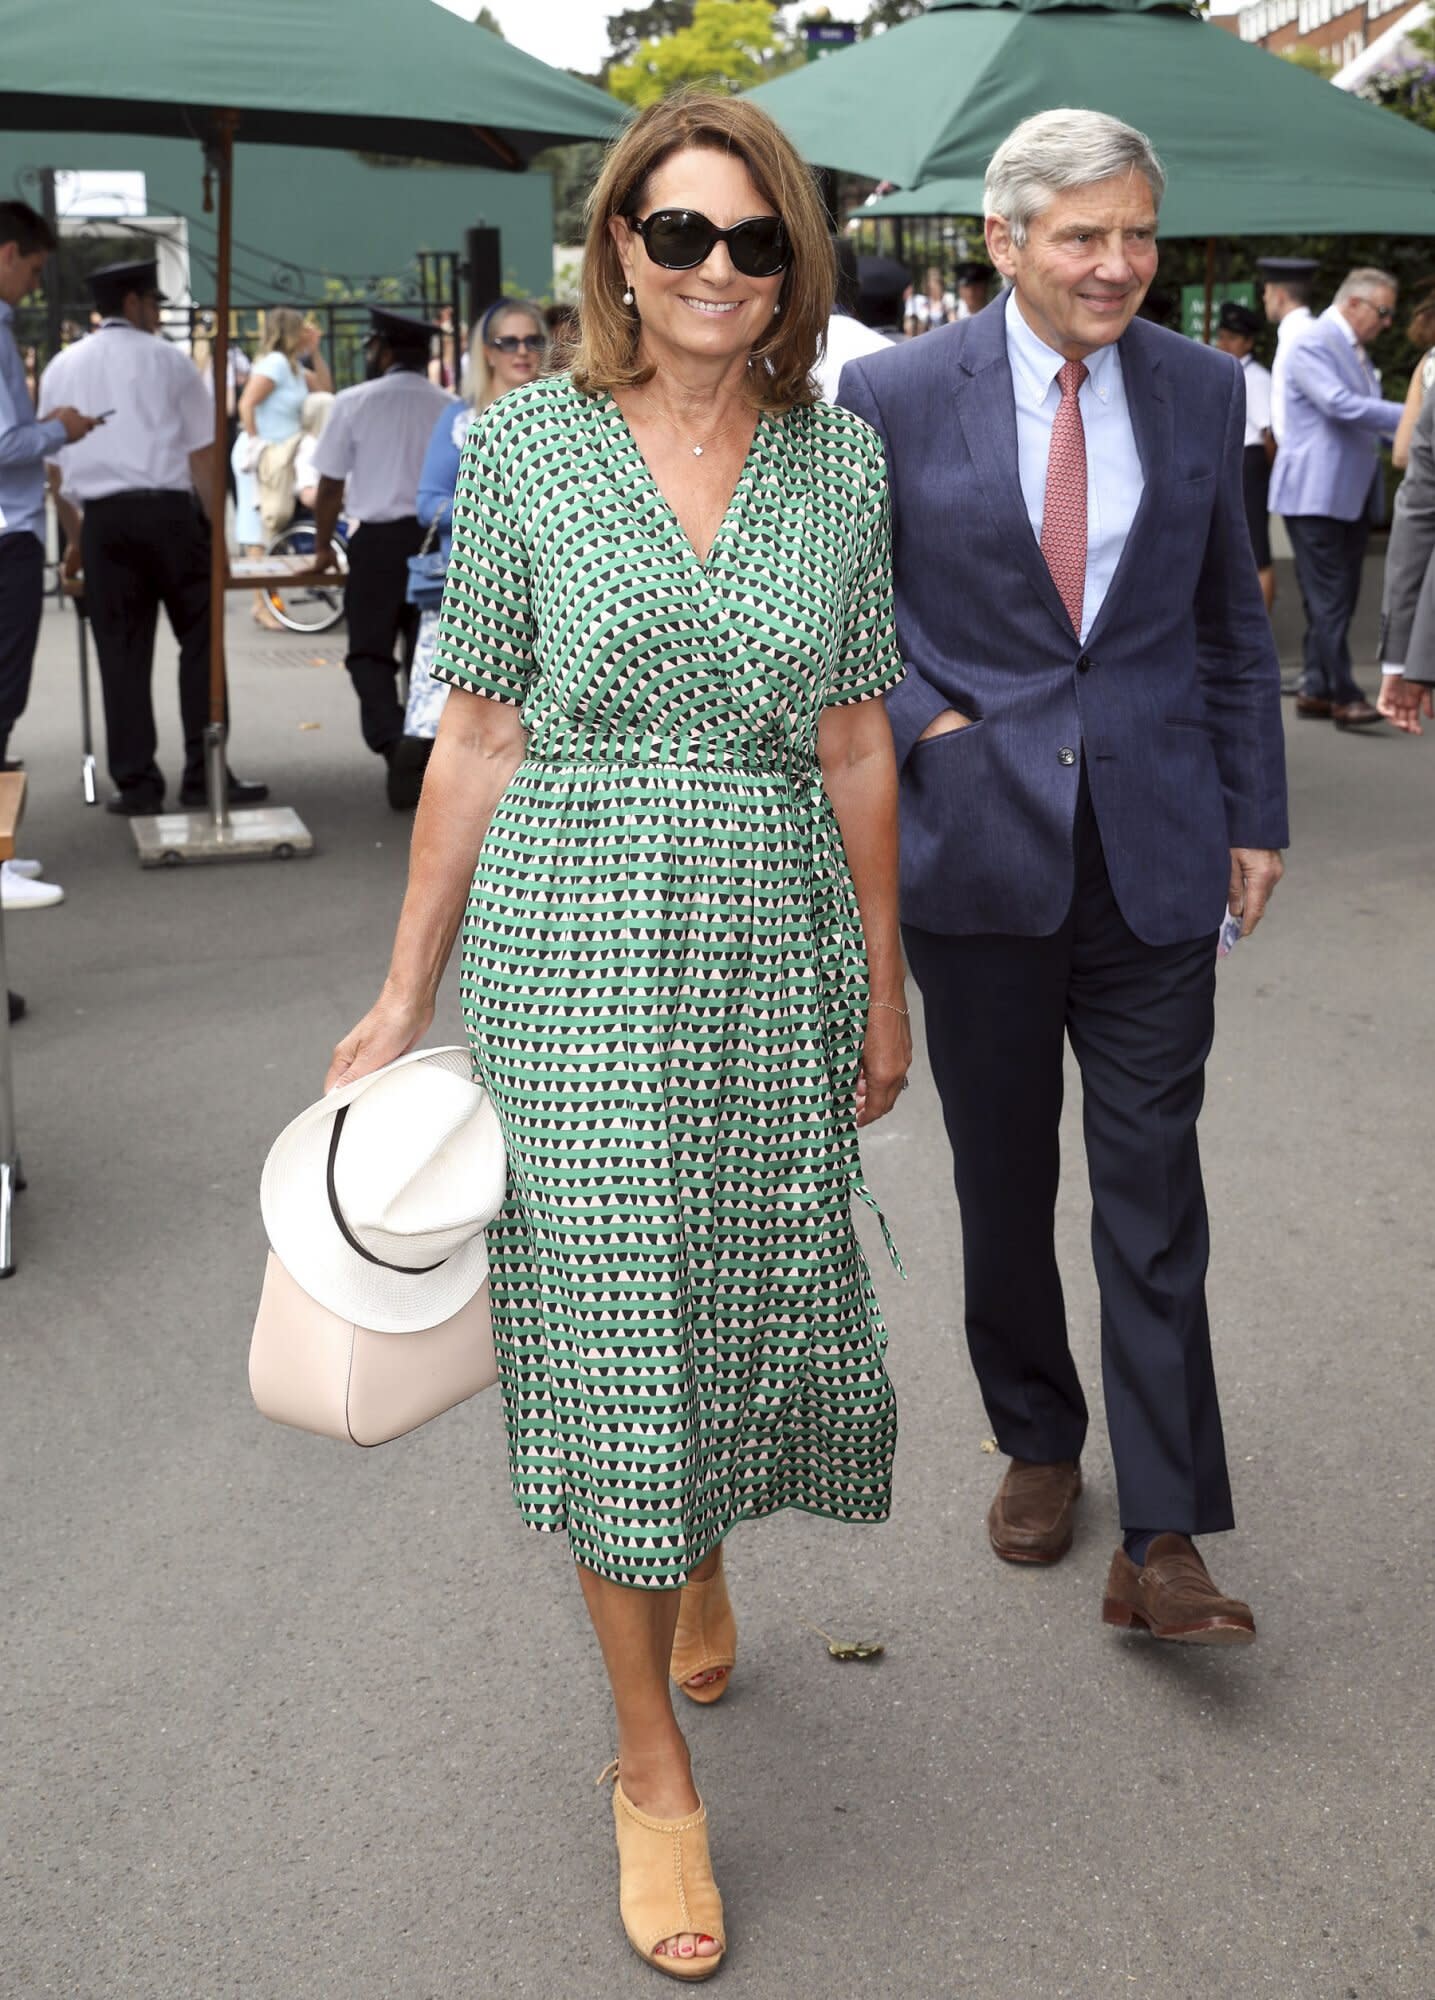 Kate Middleton’s Mom Carole Middleton Steps Out amid Coronavirus for a